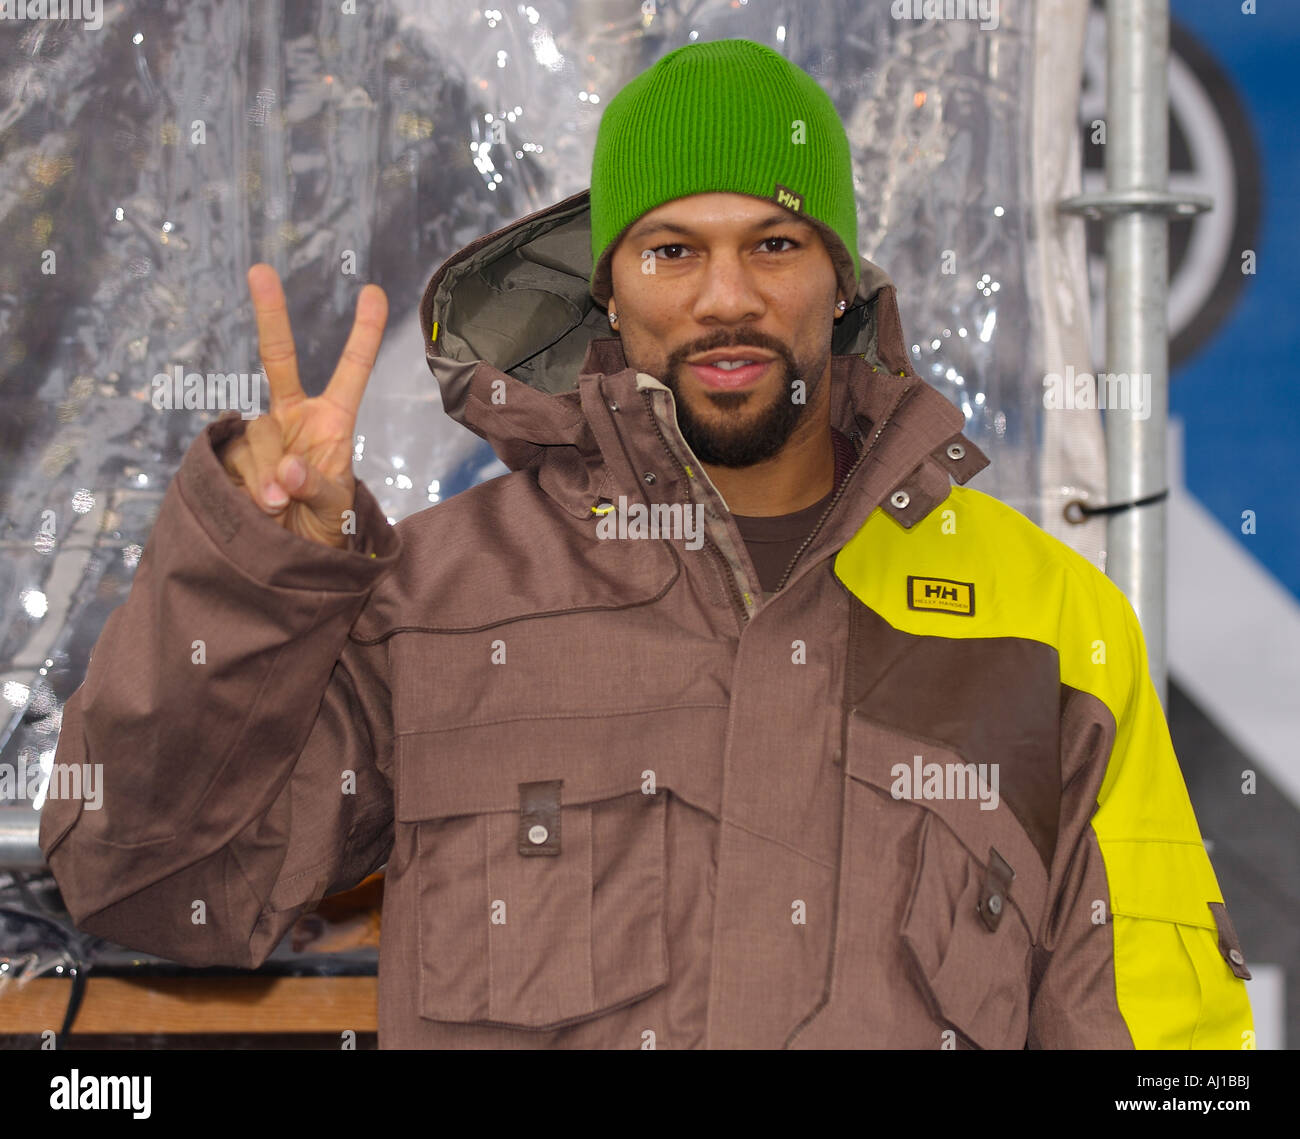 Grammy Award Winning Rapper Common give a peace sign at the 2007 ESPN Winter X Games 11 Snowboard Slopestyle Medal Ceremony Stock Photo